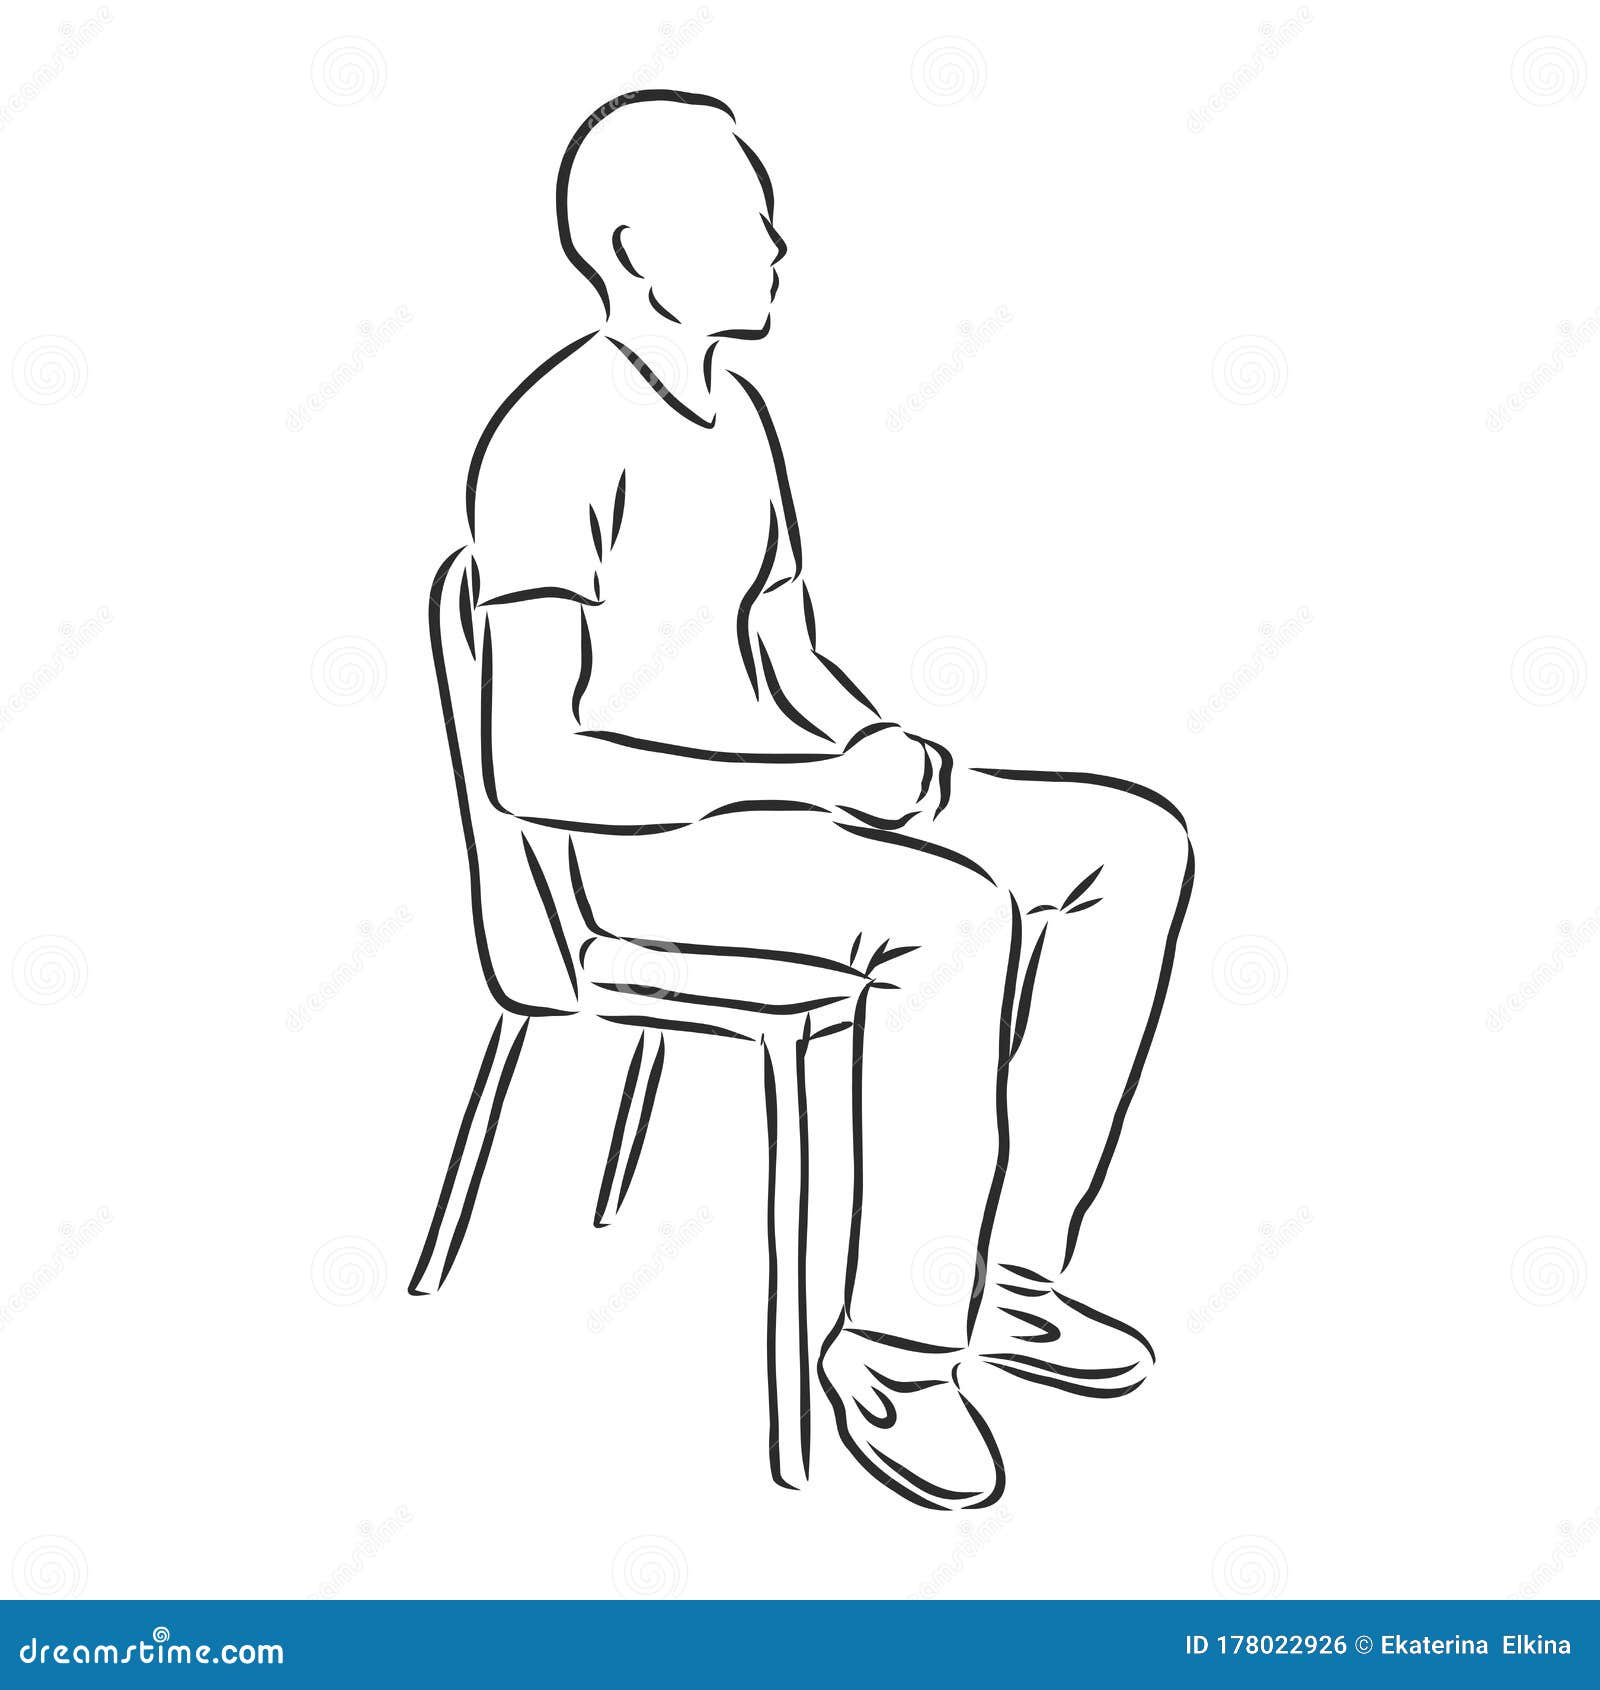 Isolated, single line drawing, man sitting posters for the wall • posters  thinking, hand, solitude | myloview.com